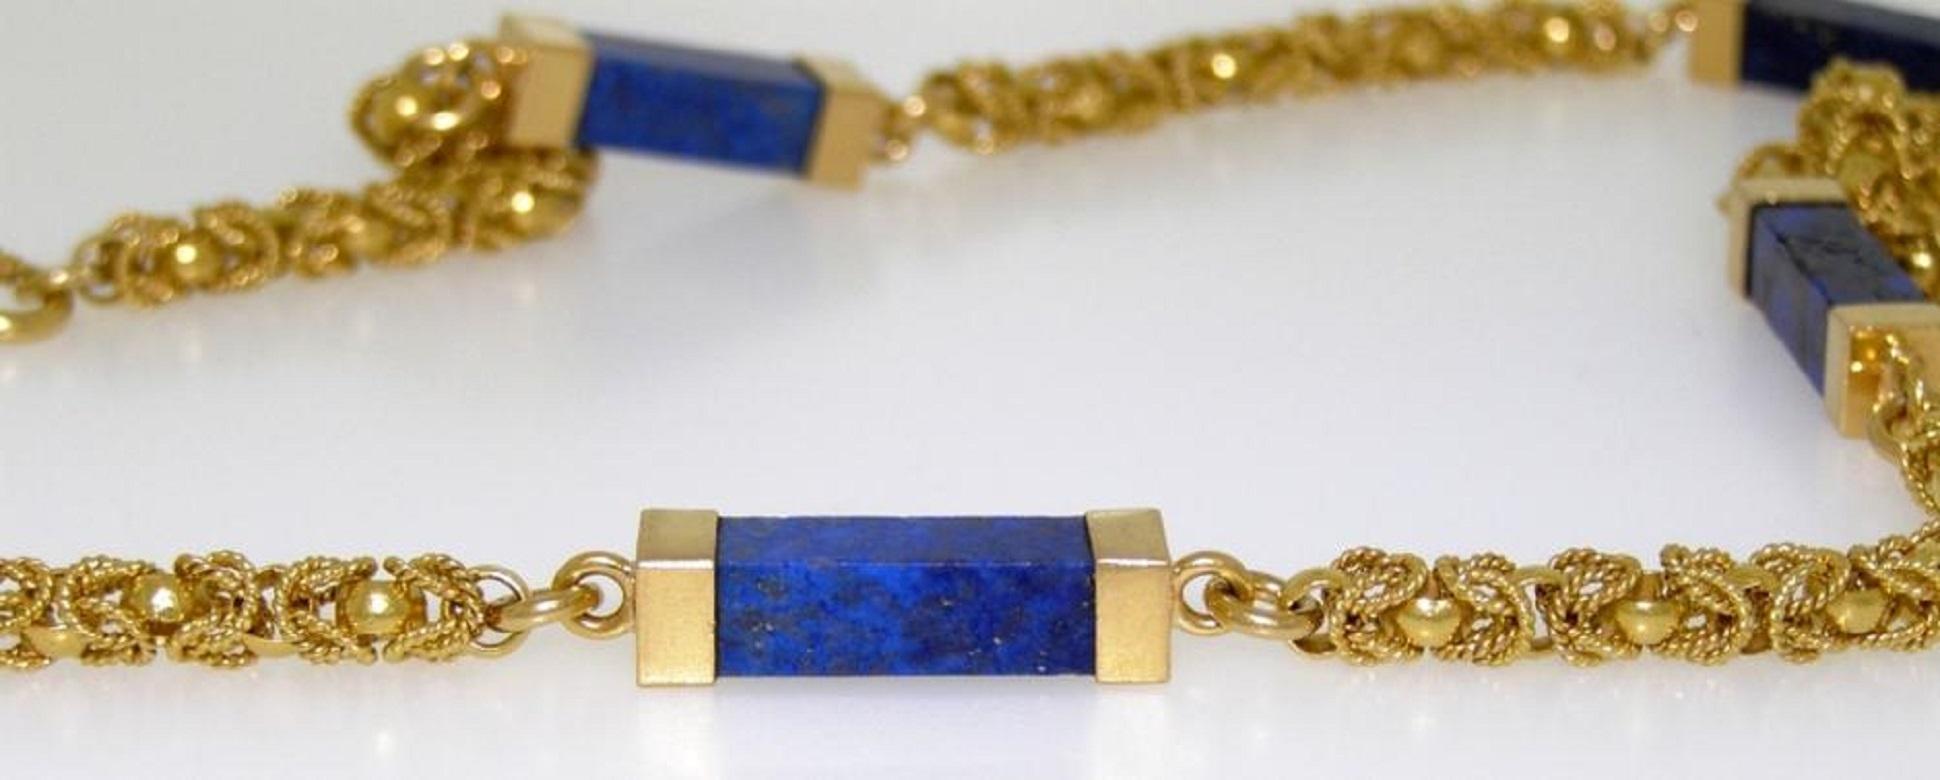 Vintage Fine Quality Lapis Lazuli 18k Yellow Gold Long Necklace 28 Inches A fine quality meticulously made Lapis Lazuli and 18k yellow gold long necklace. Highly intricate Byzantine-style design 18k yellow gold chain separated at intervals by a